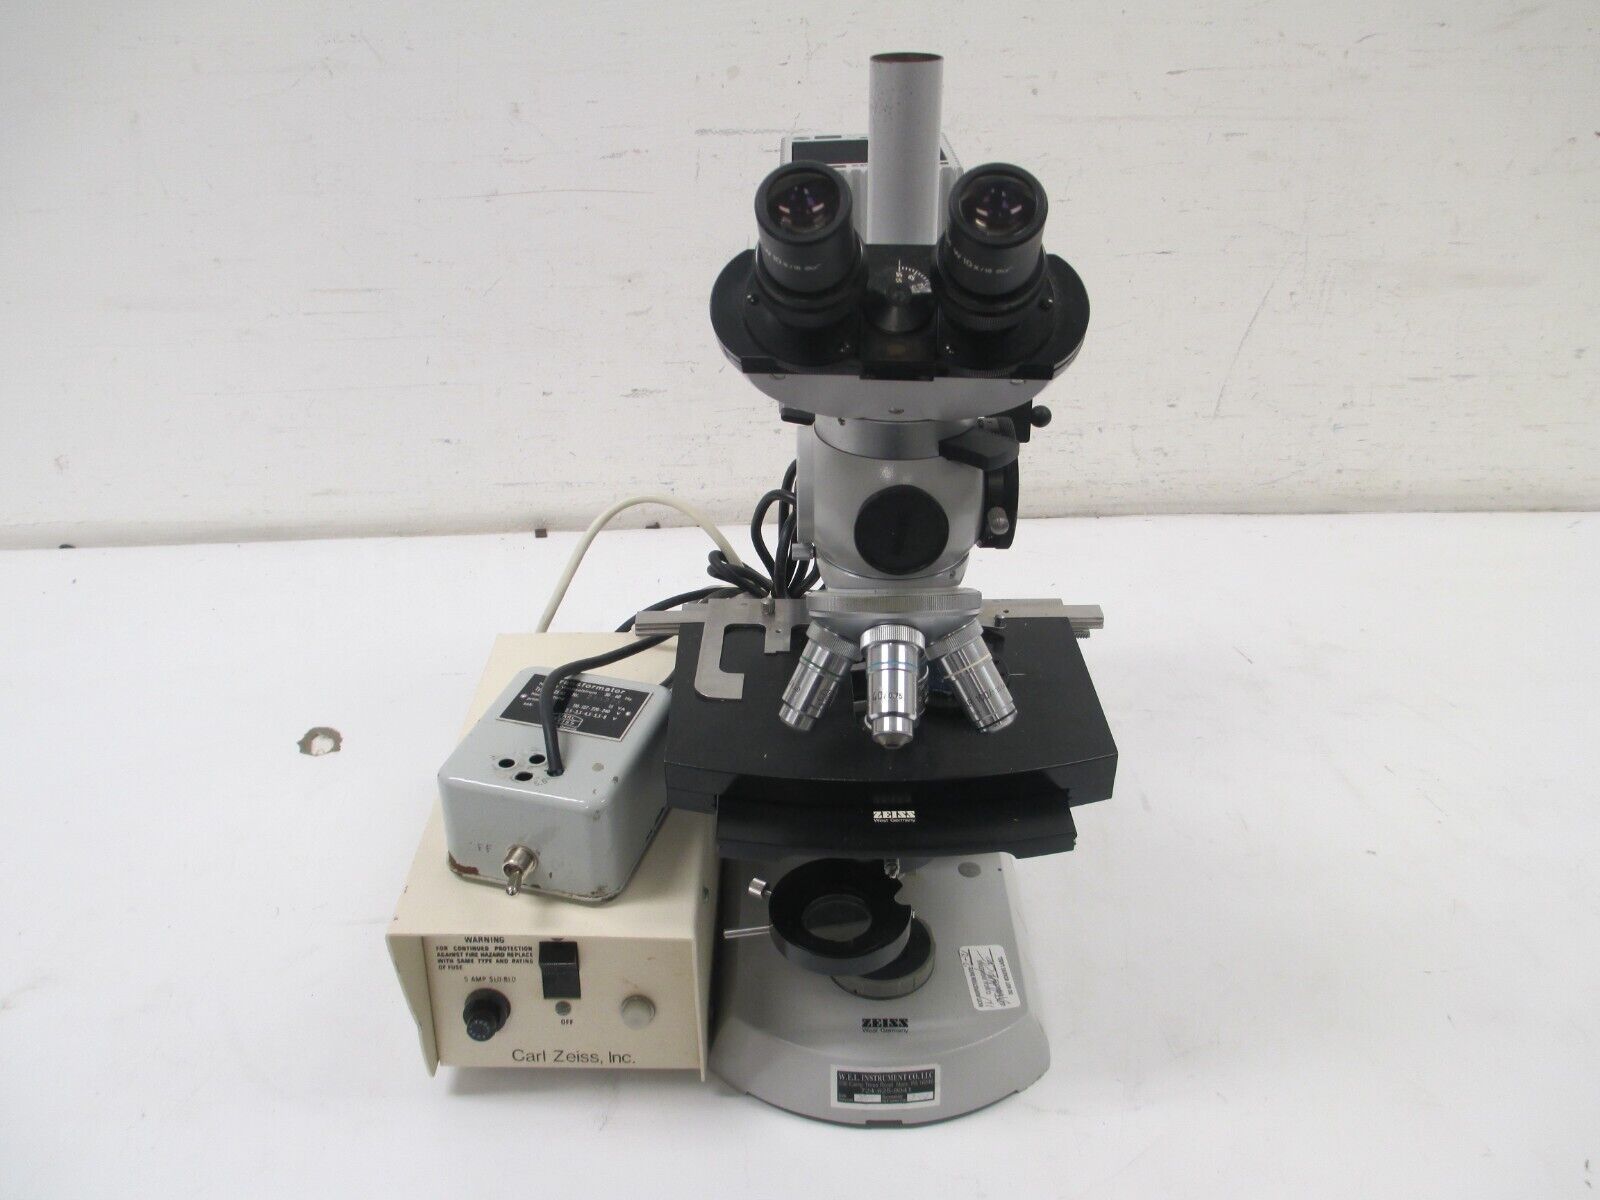 Zeiss Microscope w/ 4 objectives, Lamp House illuminator, and transformer